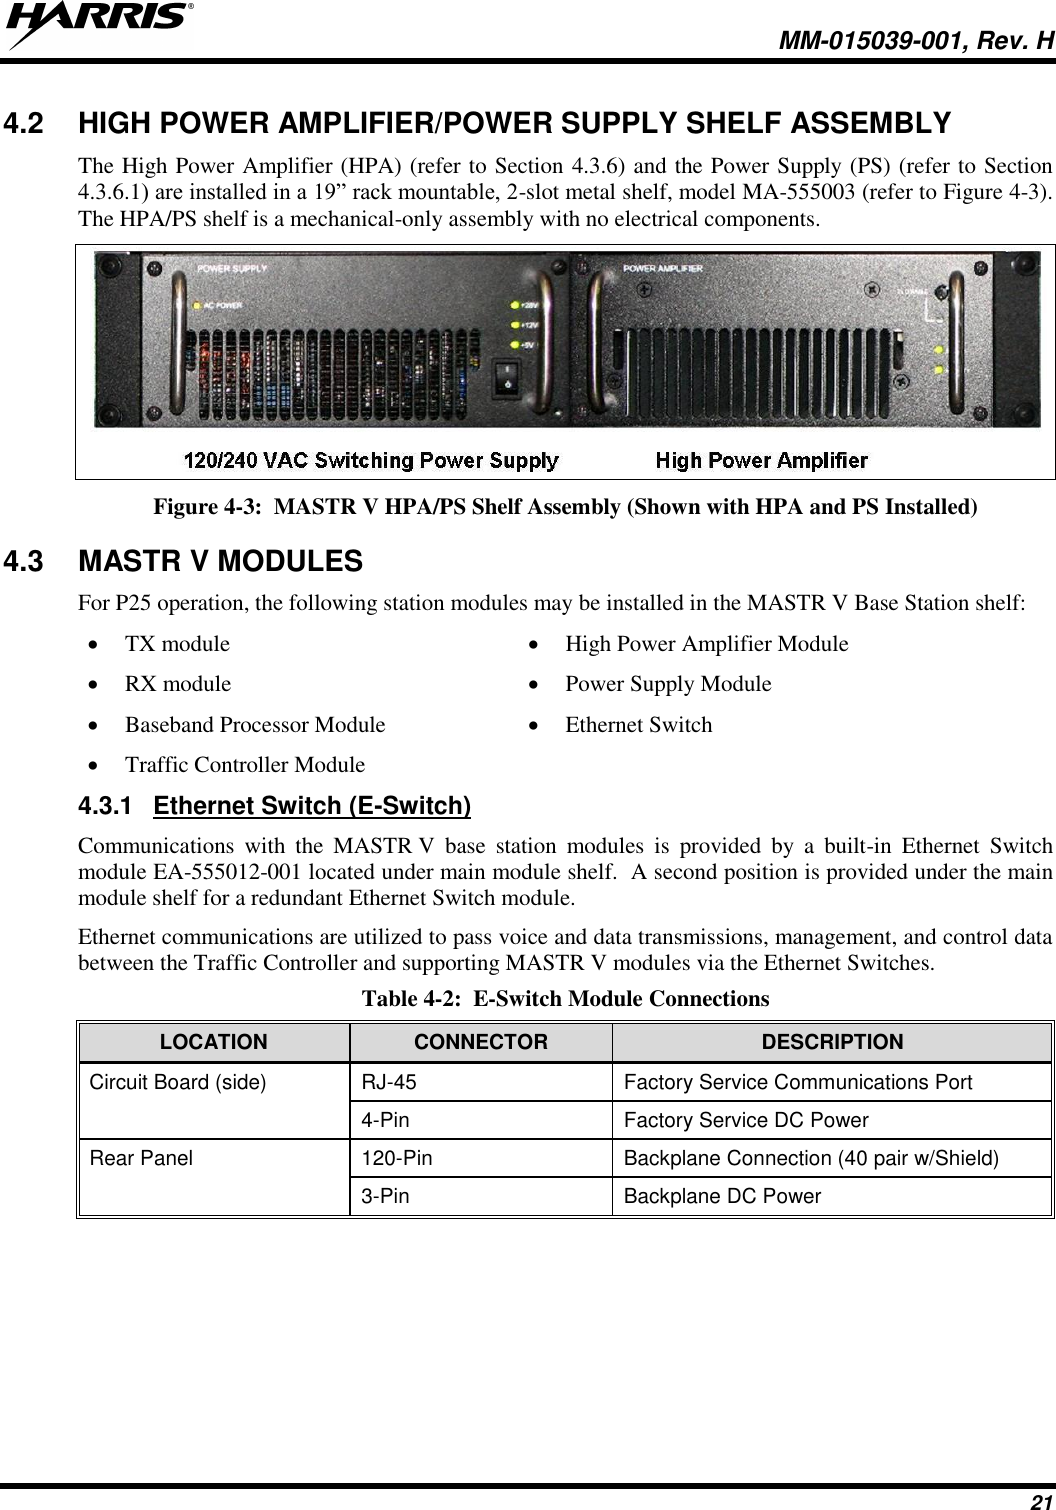   MM-015039-001, Rev. H 21 4.2  HIGH POWER AMPLIFIER/POWER SUPPLY SHELF ASSEMBLY The High Power Amplifier (HPA) (refer to Section 4.3.6) and the Power Supply (PS) (refer to Section 4.3.6.1) are installed in a 19” rack mountable, 2-slot metal shelf, model MA-555003 (refer to Figure 4-3).  The HPA/PS shelf is a mechanical-only assembly with no electrical components.  Figure 4-3:  MASTR V HPA/PS Shelf Assembly (Shown with HPA and PS Installed) 4.3  MASTR V MODULES For P25 operation, the following station modules may be installed in the MASTR V Base Station shelf:  TX module  RX module  Baseband Processor Module  Traffic Controller Module  High Power Amplifier Module  Power Supply Module  Ethernet Switch 4.3.1  Ethernet Switch (E-Switch) Communications  with  the  MASTR V  base  station  modules  is  provided  by  a  built-in  Ethernet  Switch module EA-555012-001 located under main module shelf.  A second position is provided under the main module shelf for a redundant Ethernet Switch module. Ethernet communications are utilized to pass voice and data transmissions, management, and control data between the Traffic Controller and supporting MASTR V modules via the Ethernet Switches.   Table 4-2:  E-Switch Module Connections LOCATION CONNECTOR  DESCRIPTION Circuit Board (side) RJ-45 Factory Service Communications Port 4-Pin Factory Service DC Power  Rear Panel 120-Pin Backplane Connection (40 pair w/Shield) 3-Pin Backplane DC Power  